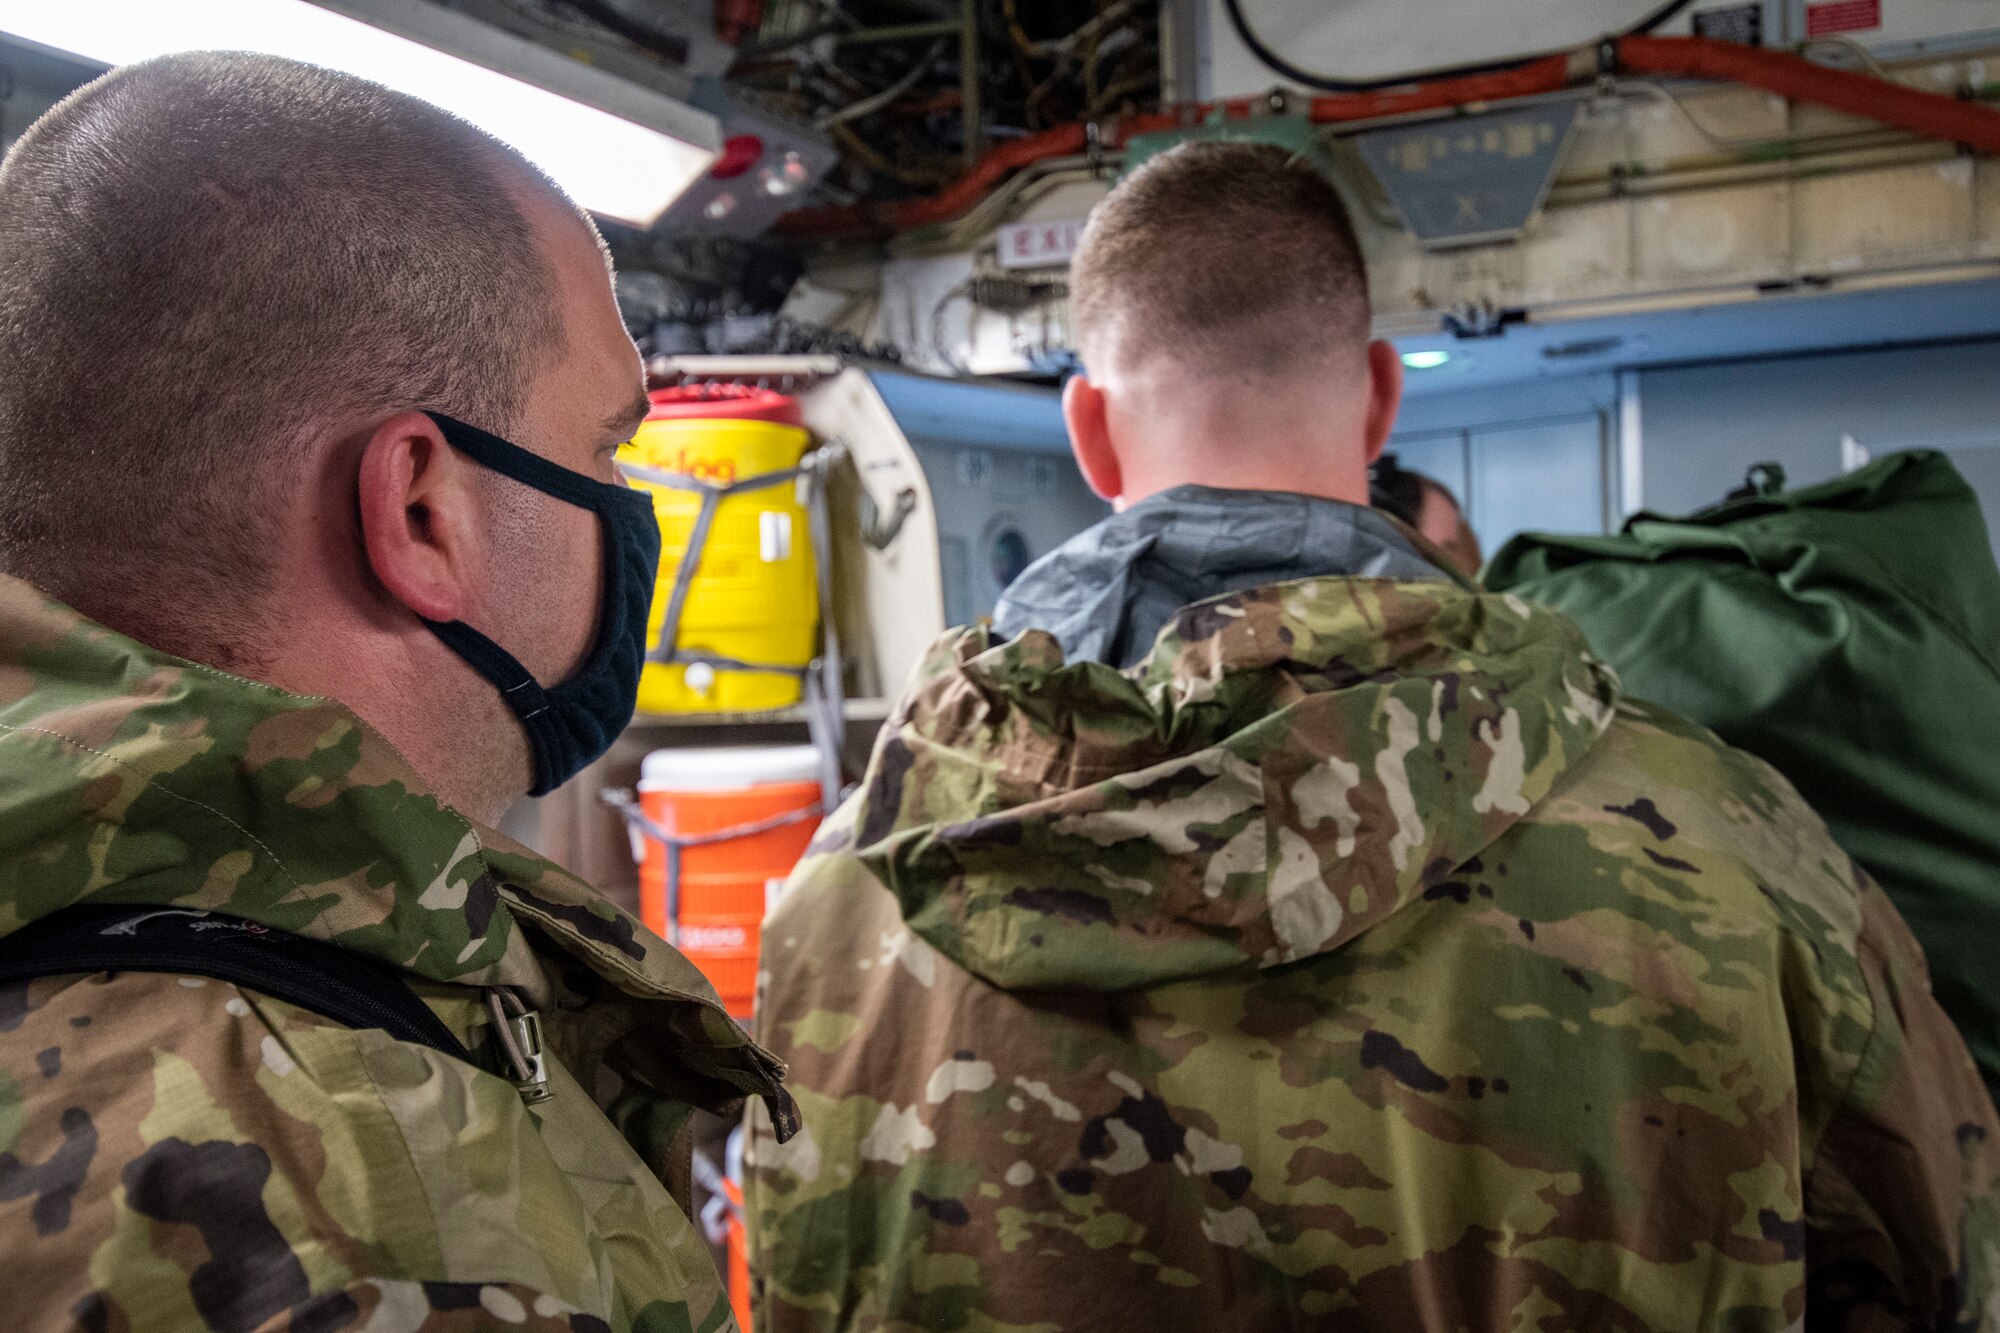 Two airmen from the 187th Fighter Wing prepare to disembark a C-17 Globemaster as part of a rapid deployment exercise in Dothan, Ala., March 1, 2021.